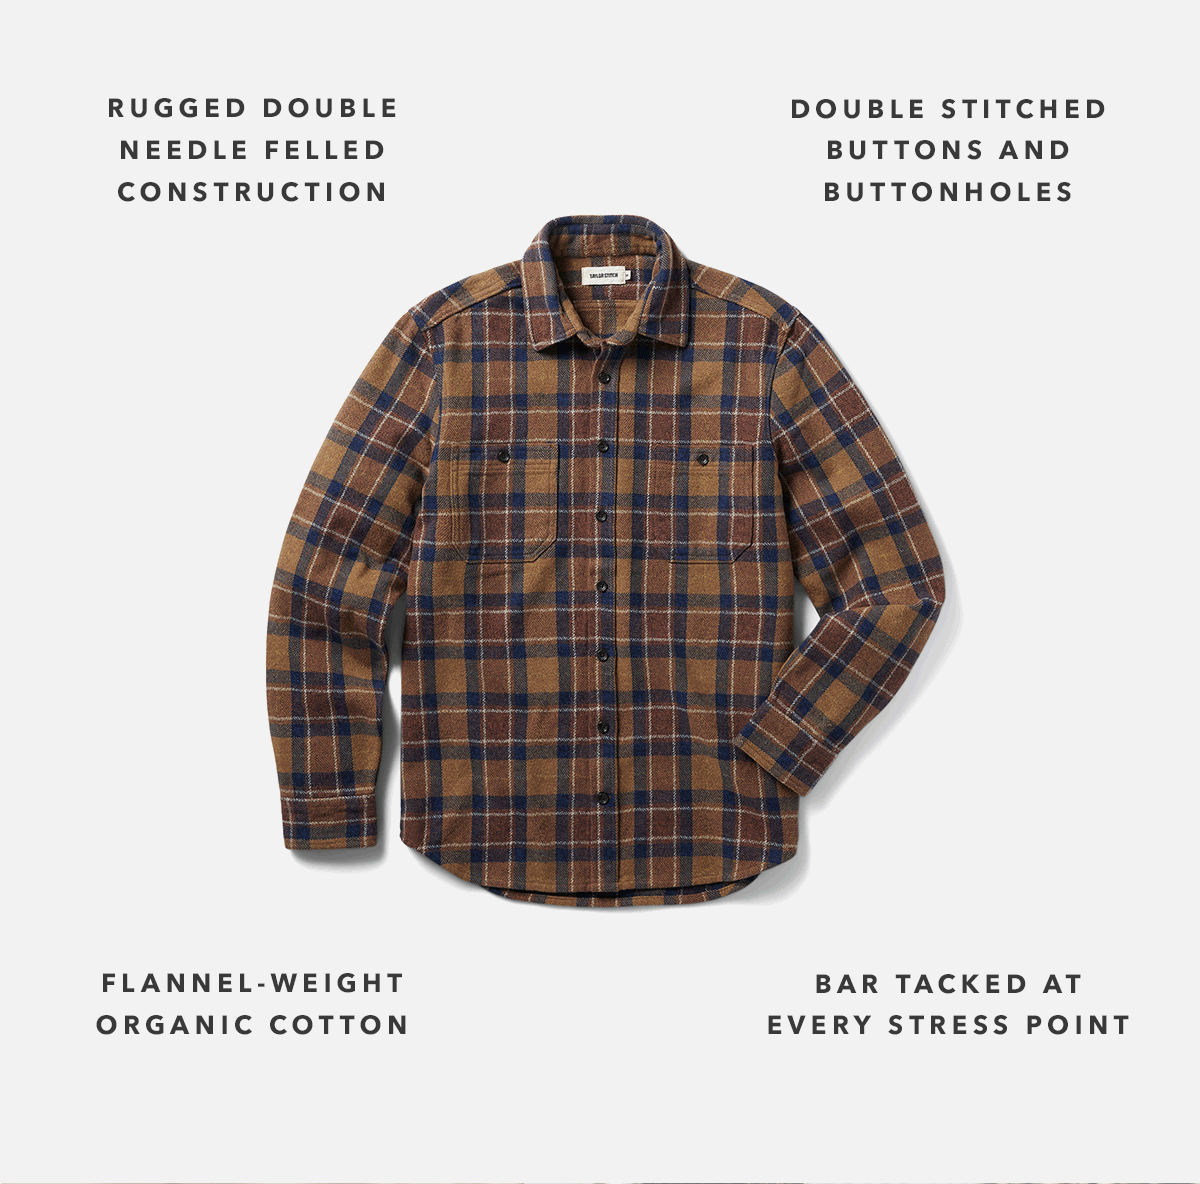 Rugged double needle felled construction. Flannel-weight organic cotton.   Bar tacked at every stress point. Double stitched buttons & buttonholes.